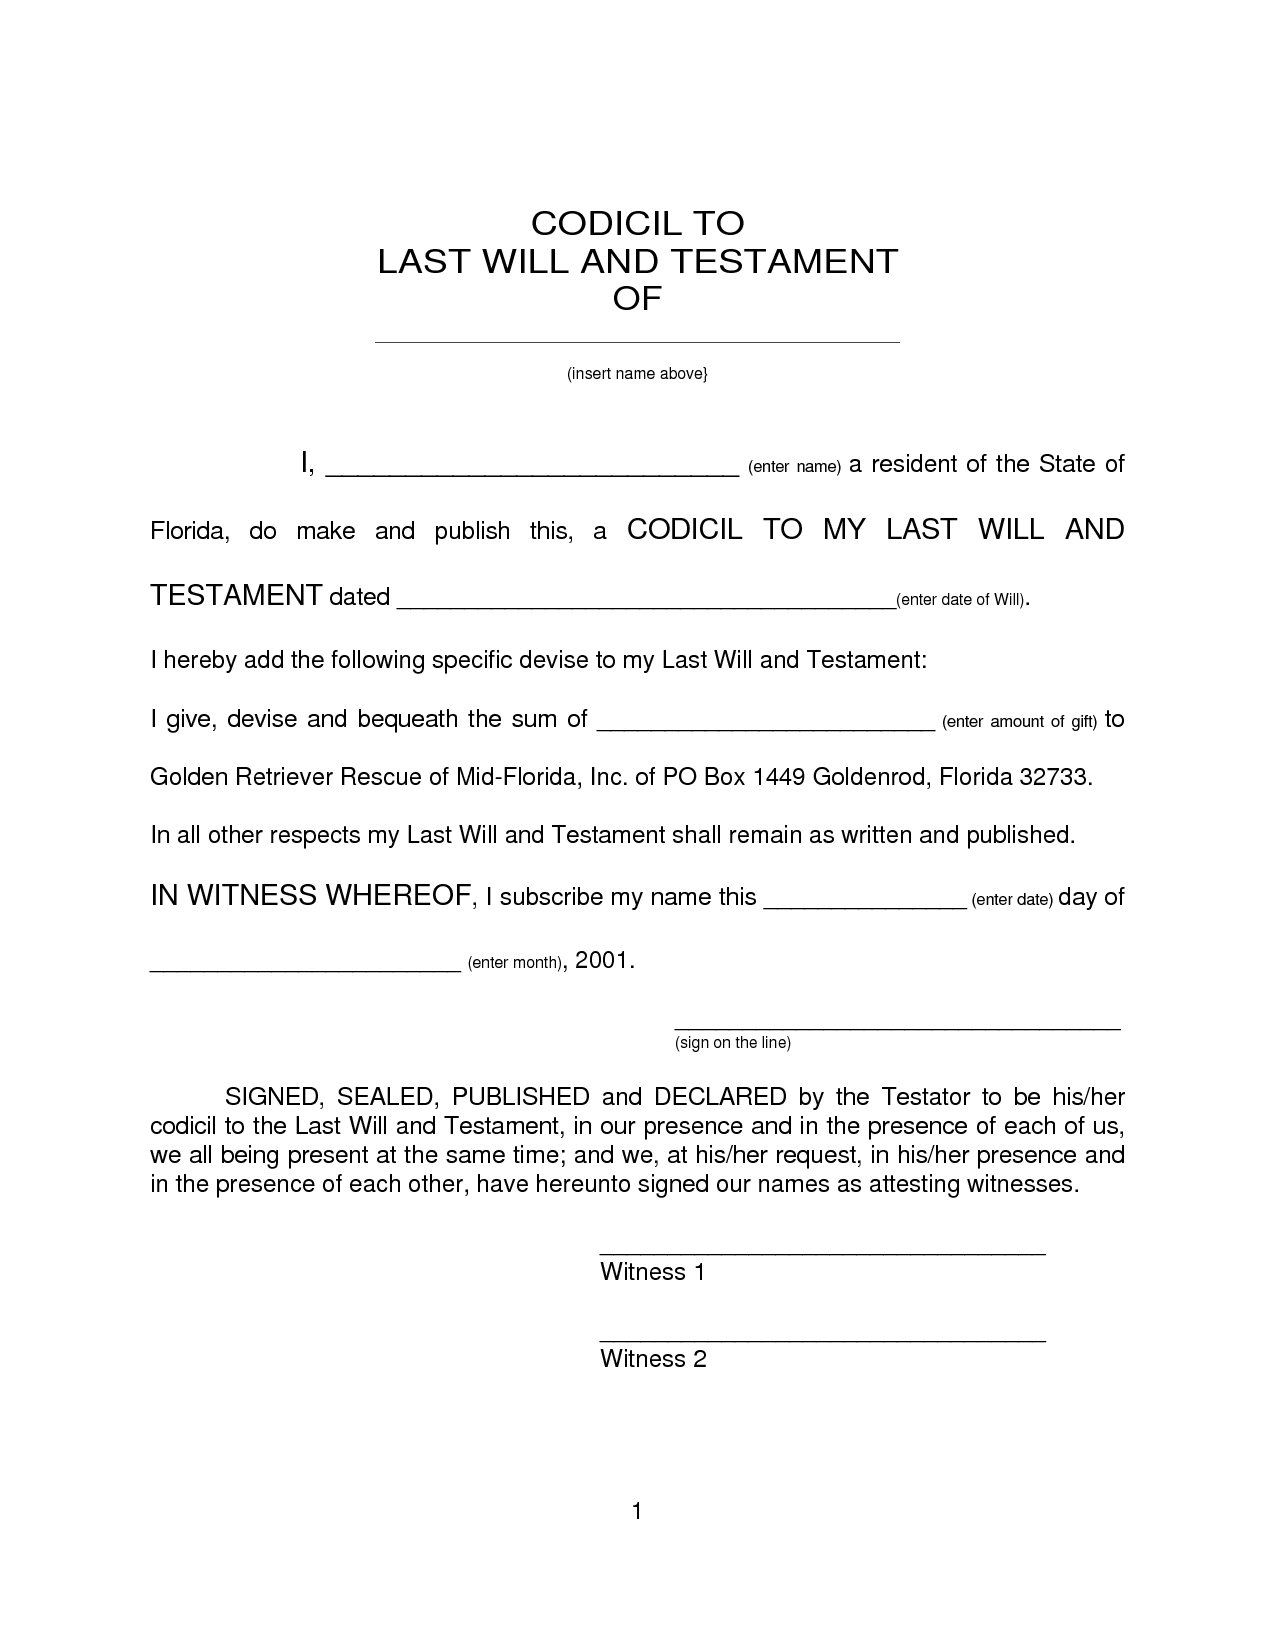 ontario-canada-free-printable-printable-last-will-and-testament-forms-ontario-view-a-sample